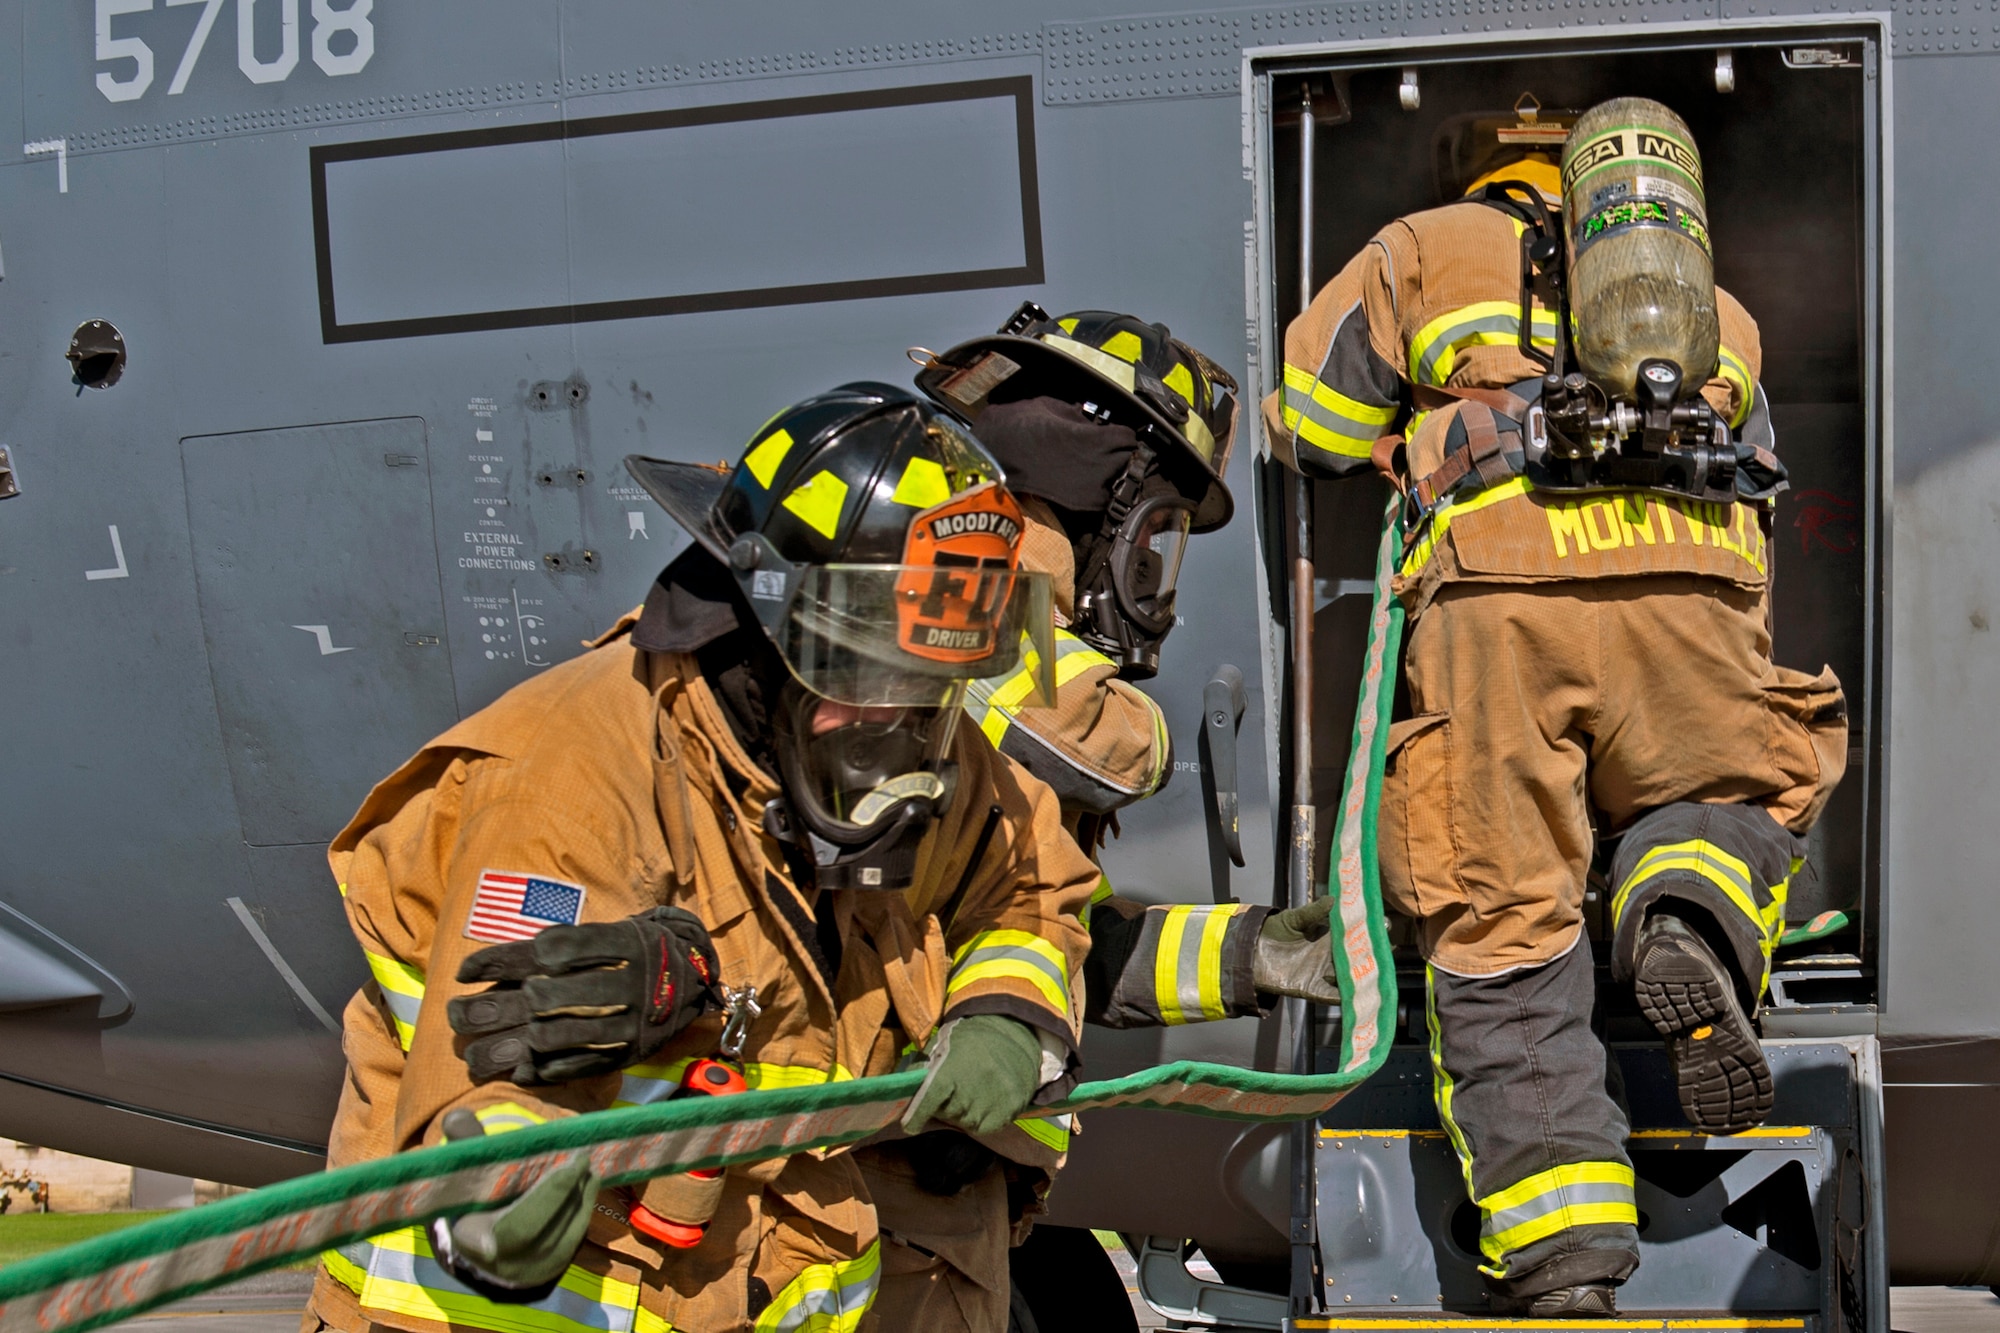 Firefighters from the 23d Civil Engineering Squadron (CES) carry a hose during an HC-130J Combat King II egress training, July 11, 2019, on Moody Air Force Base, Ga. The 23d CES conducted the exercise to simulate the rescue of victims from a smoking C-130. The firefighters were tasked with locating and providing ventilation within the aircraft to safely remove the victims. (U.S. Air Force photo by Airman Azaria E. Foster)